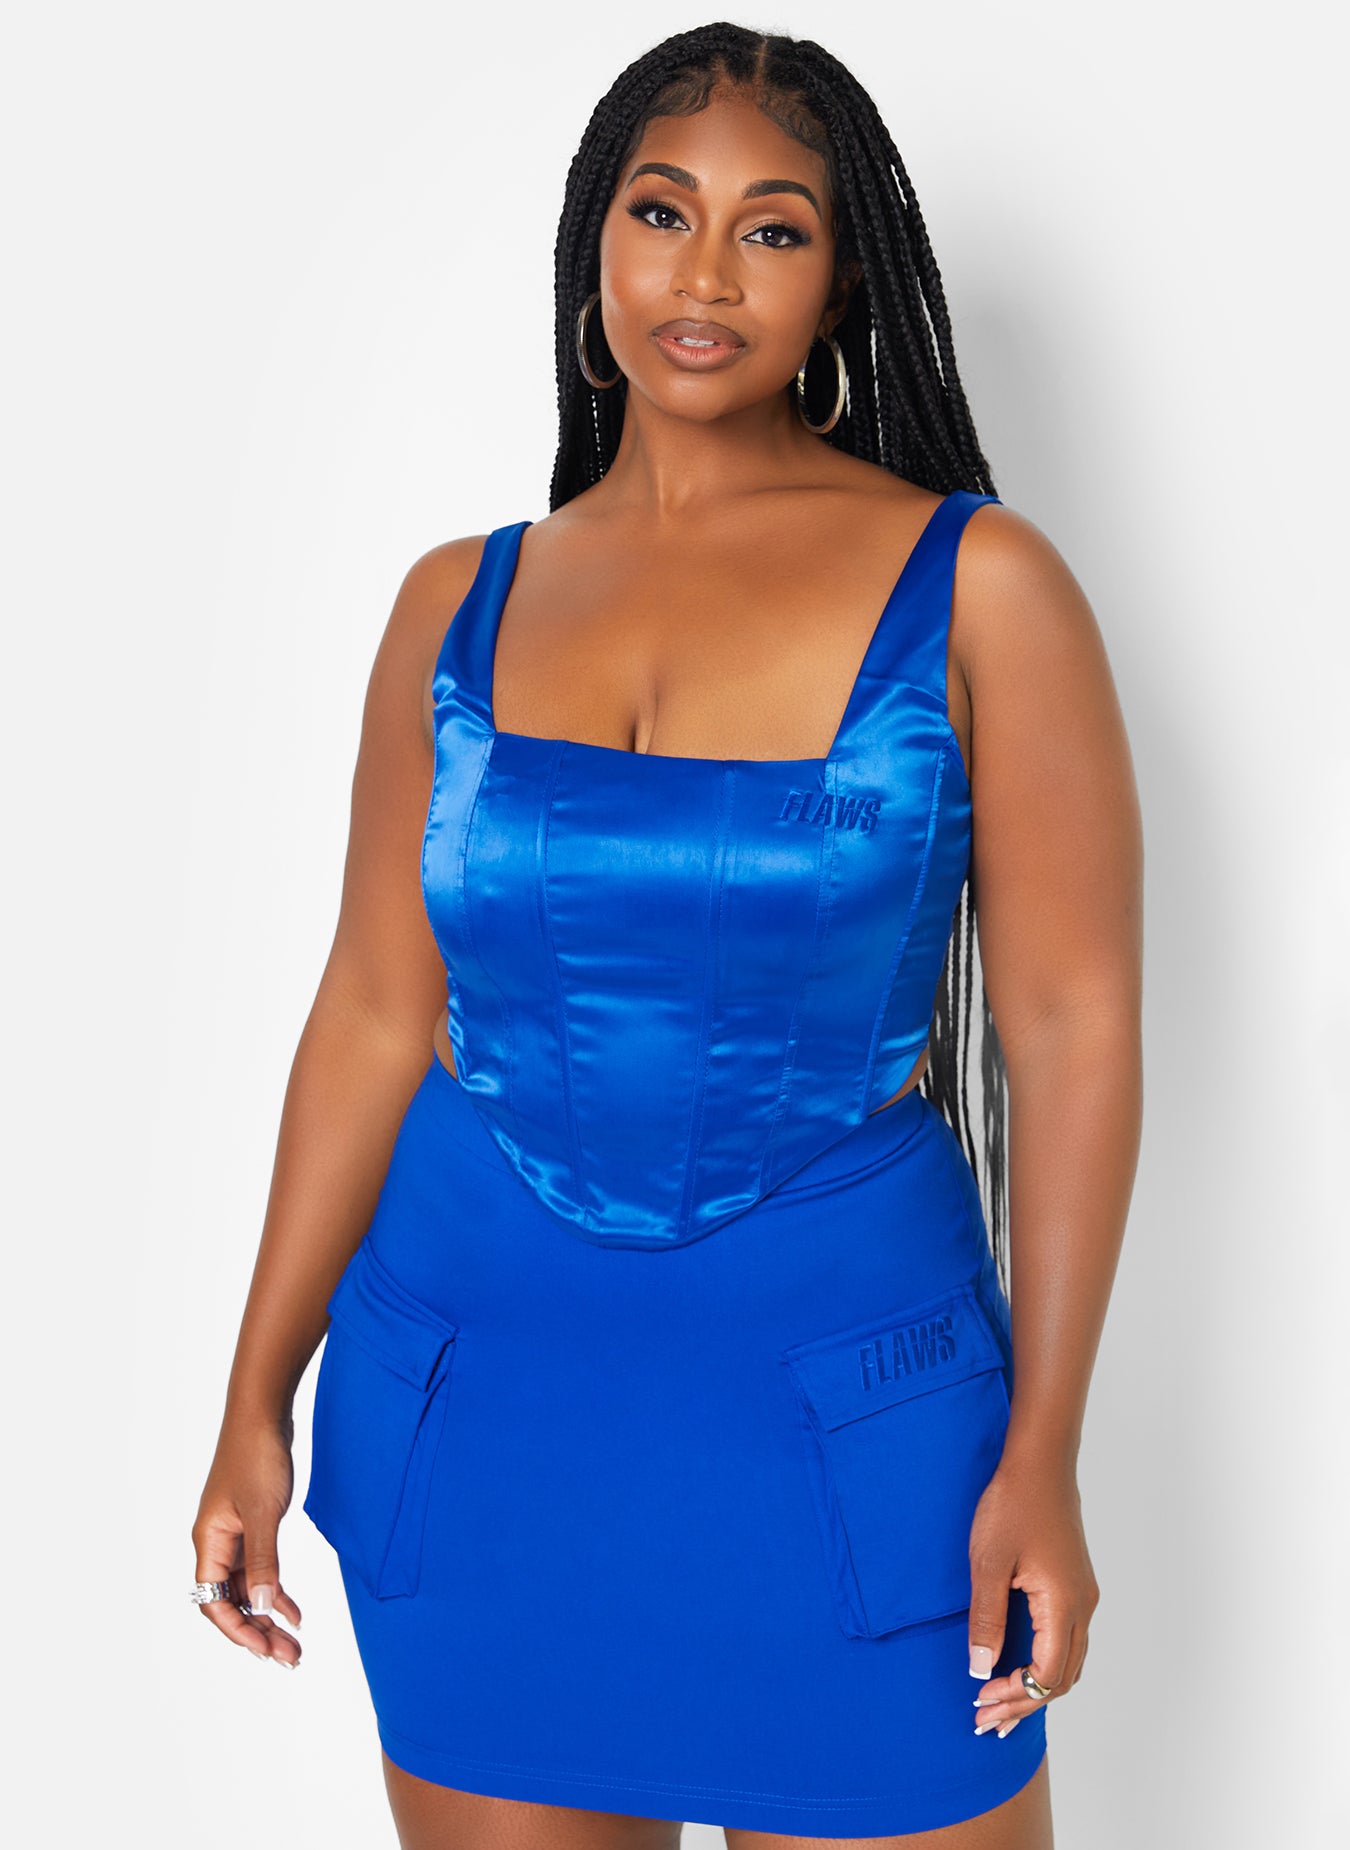 Flaws X REBDOLLS Upgrade Satin Square Neck Corset Top - Royal Blue